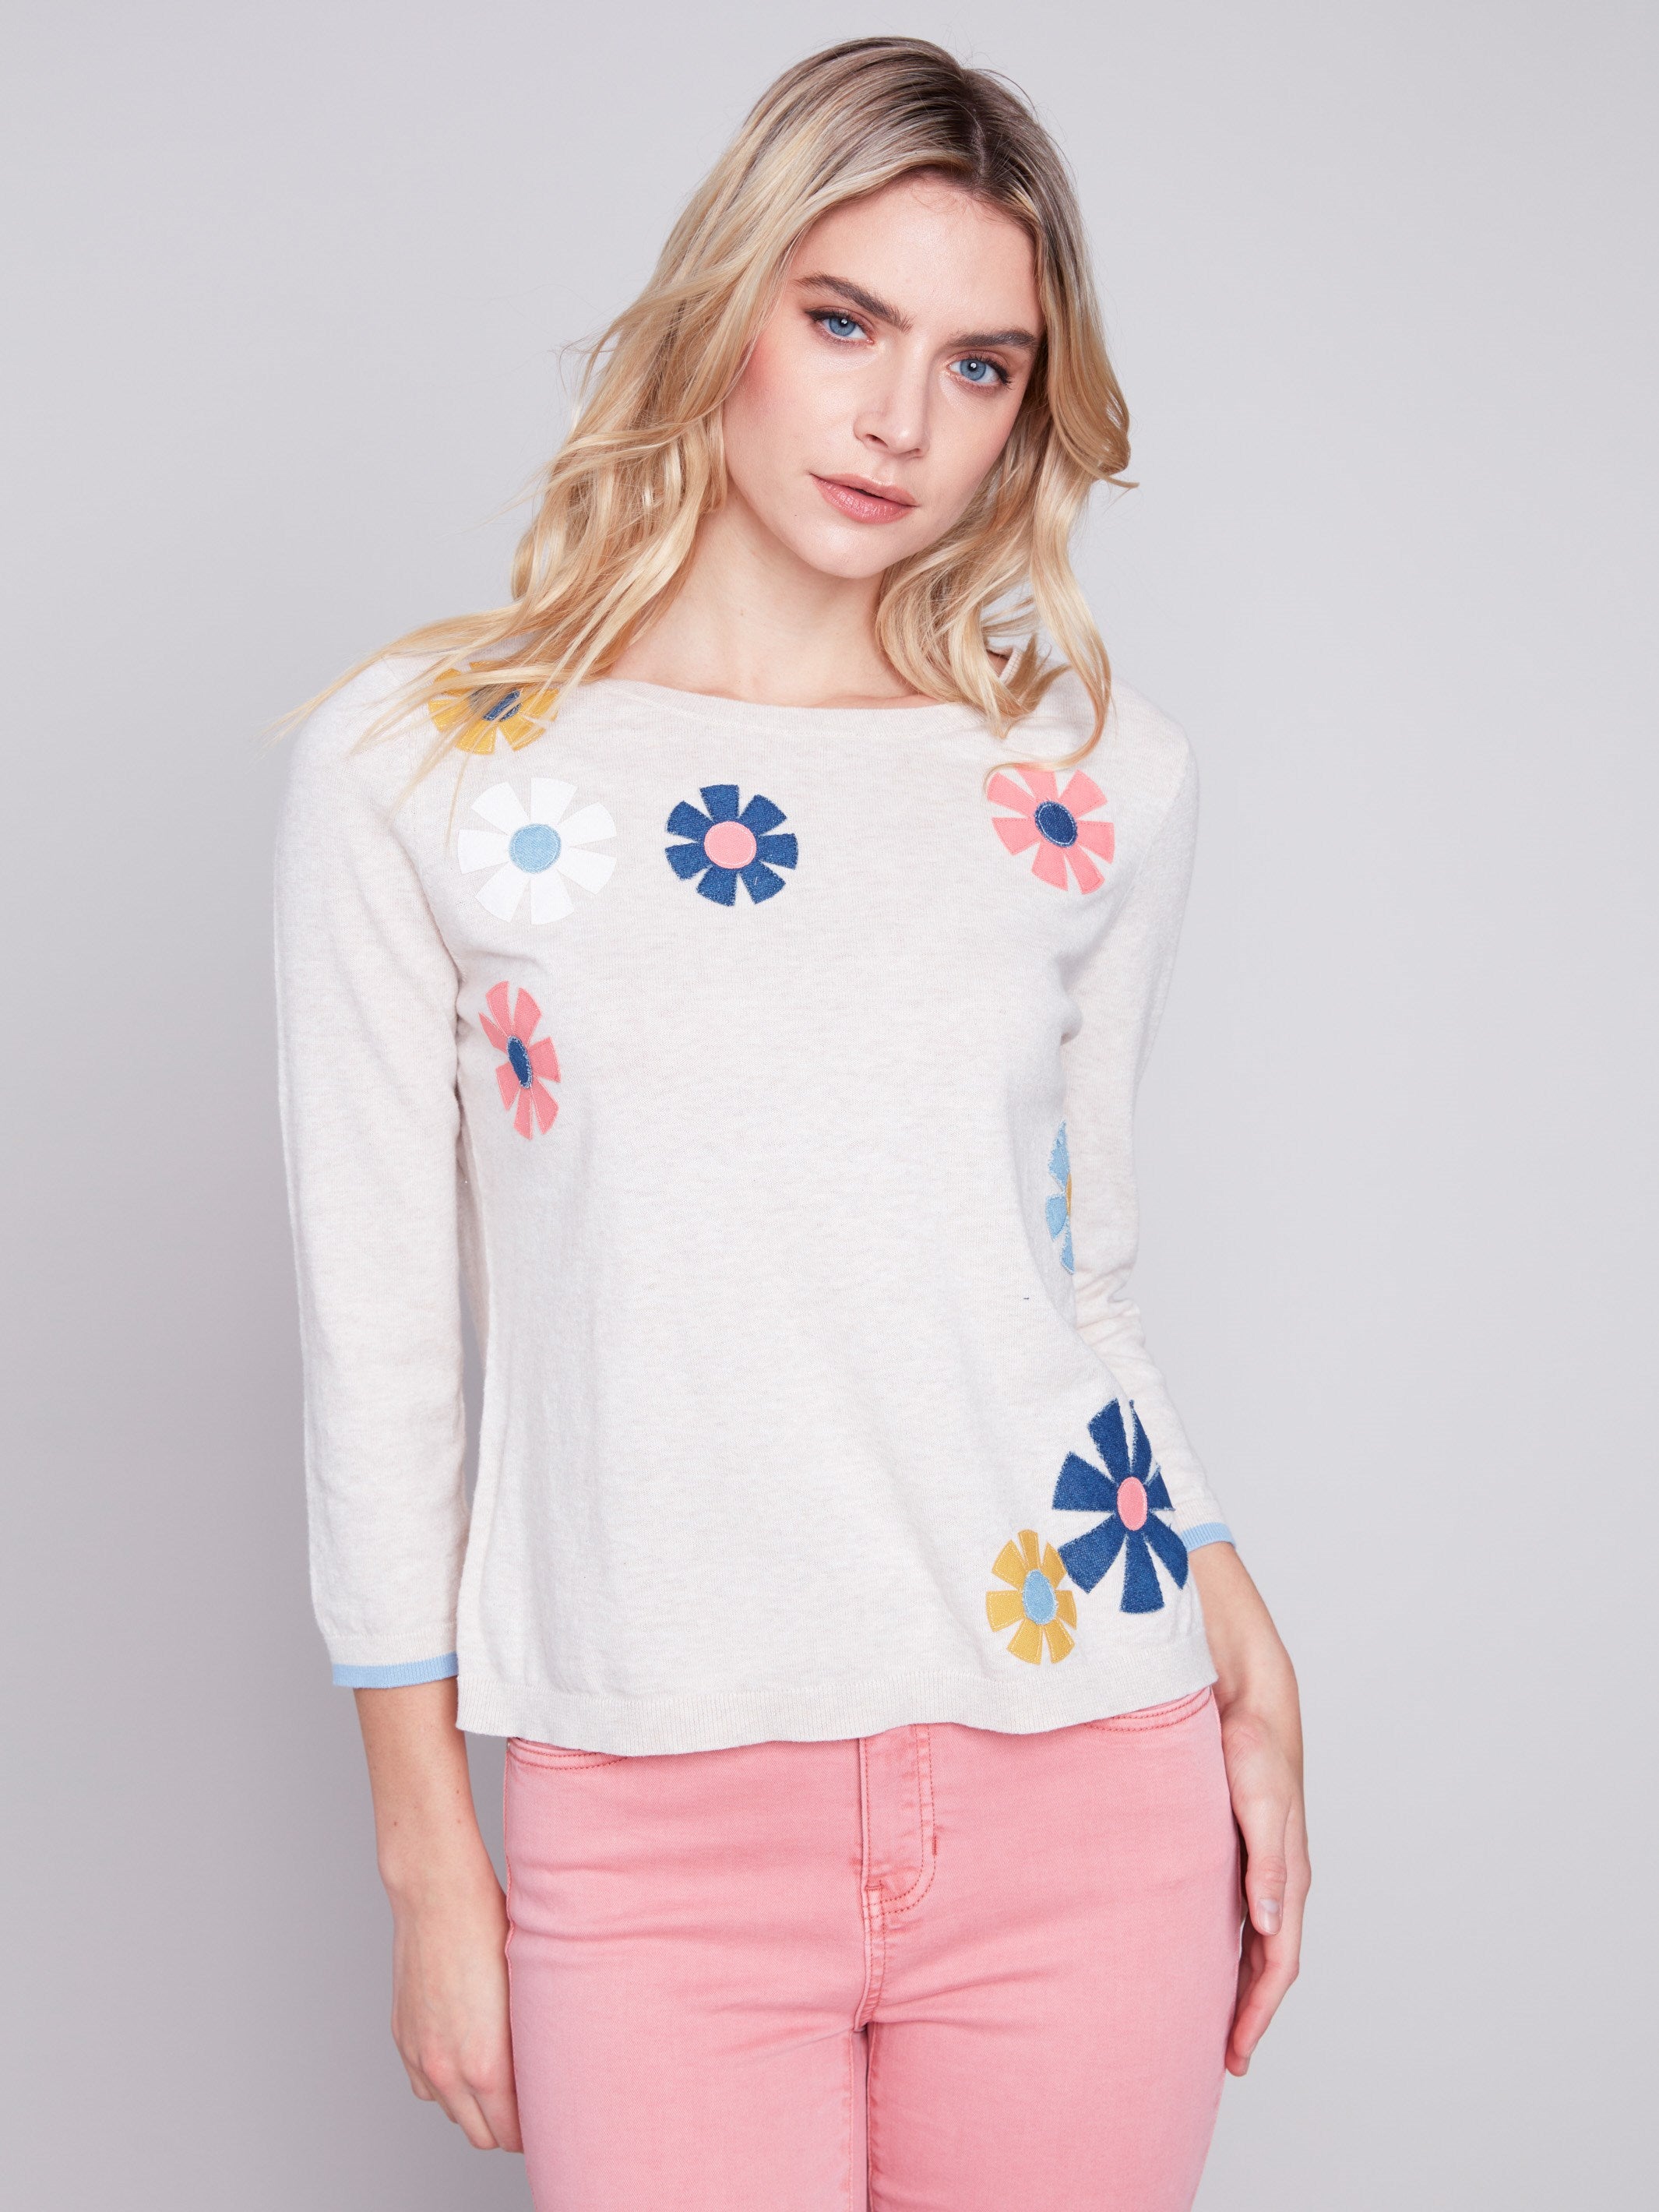 Charlie B Sweater with Flower Patches - Beige - Image 1